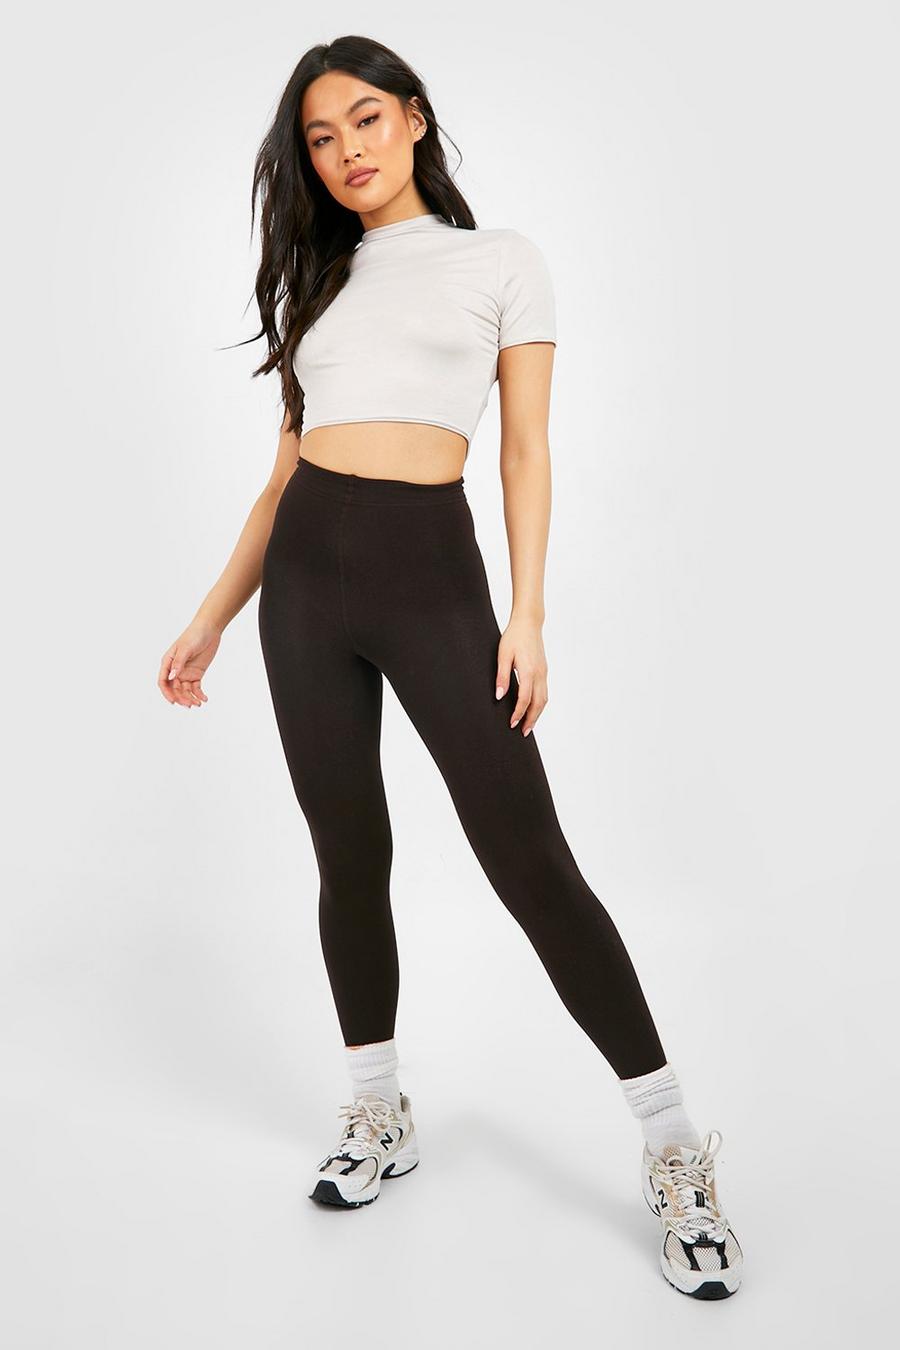 Brown High Waisted Fleece Lined Leggings image number 1